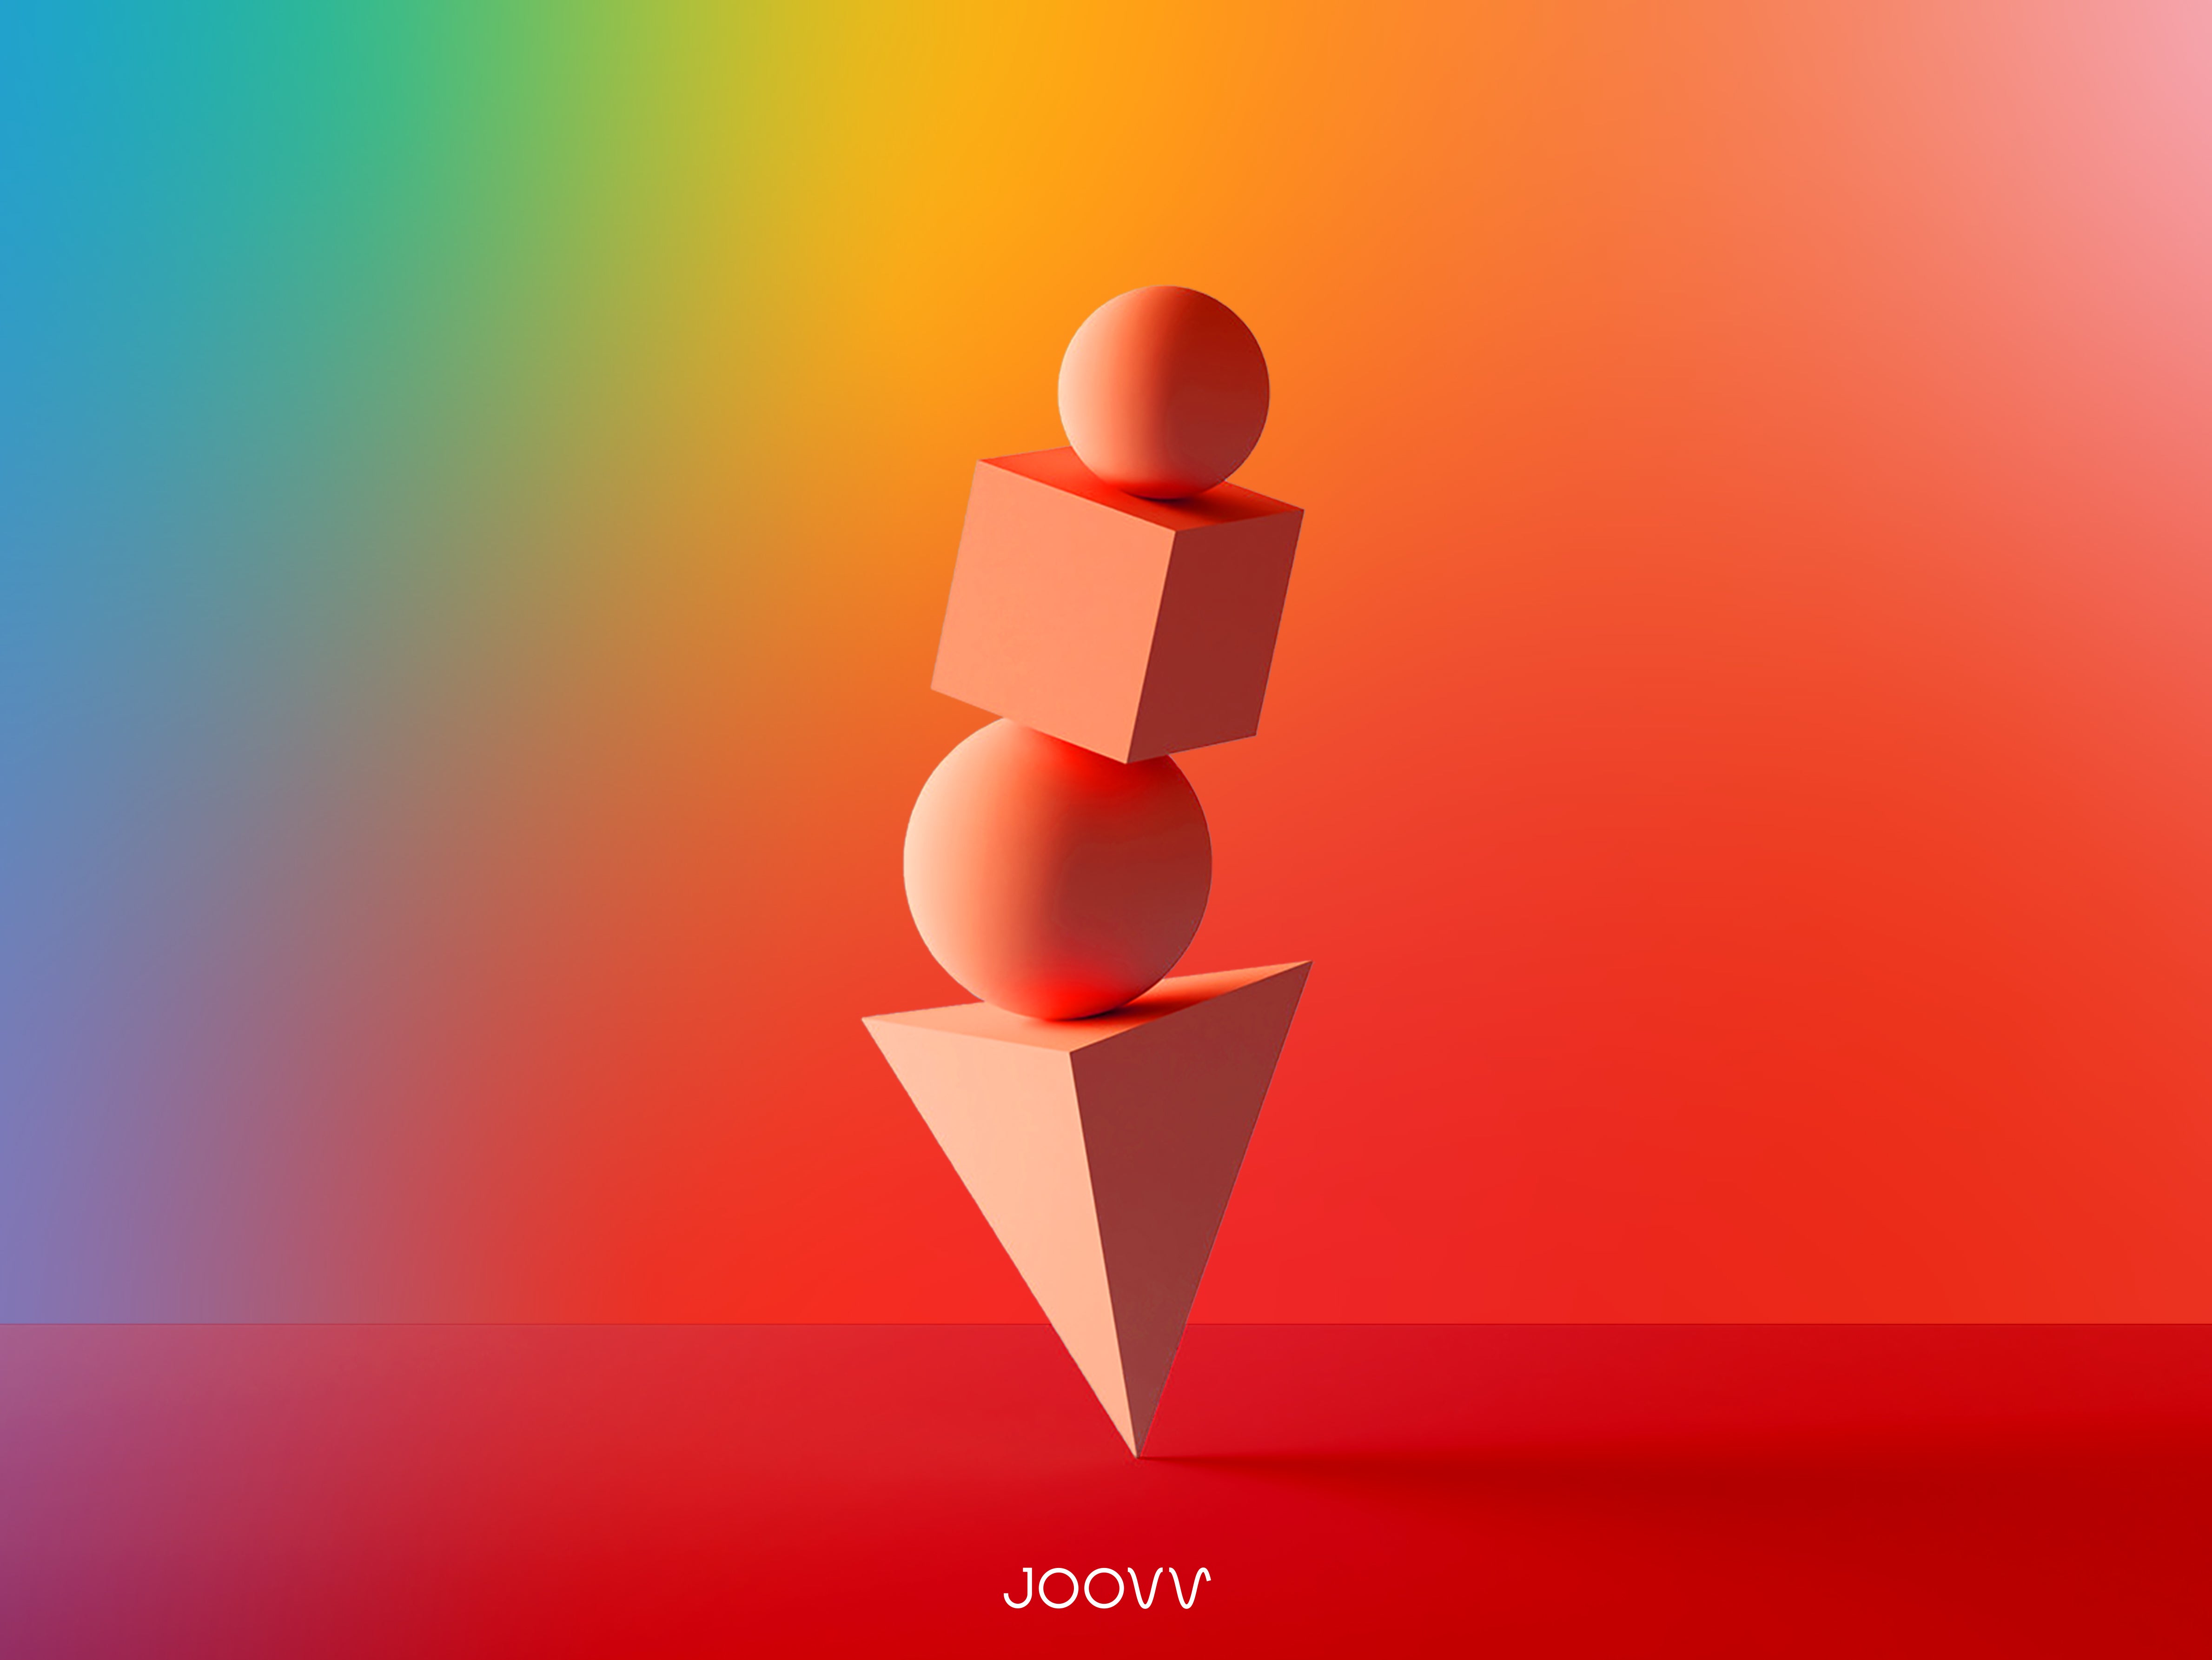 Joovv light therapy helps support a healthy, balanced life